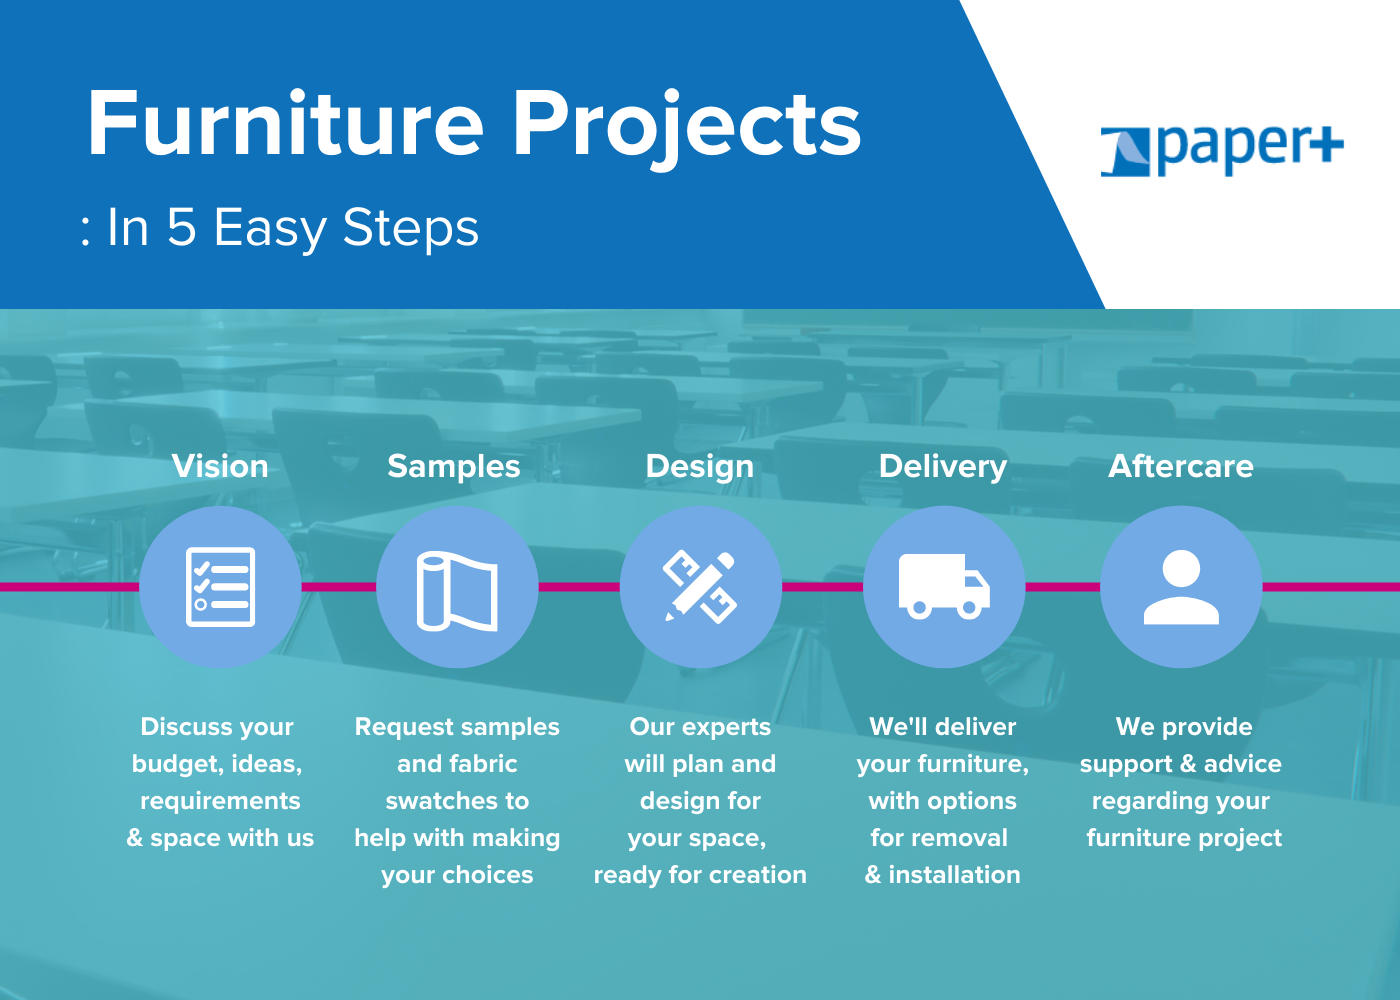 Consulting furnitute projects, providing support from design to implementation involved in all aspects, removal and installation Project management info graphic steps to consider (include options for personalisation)